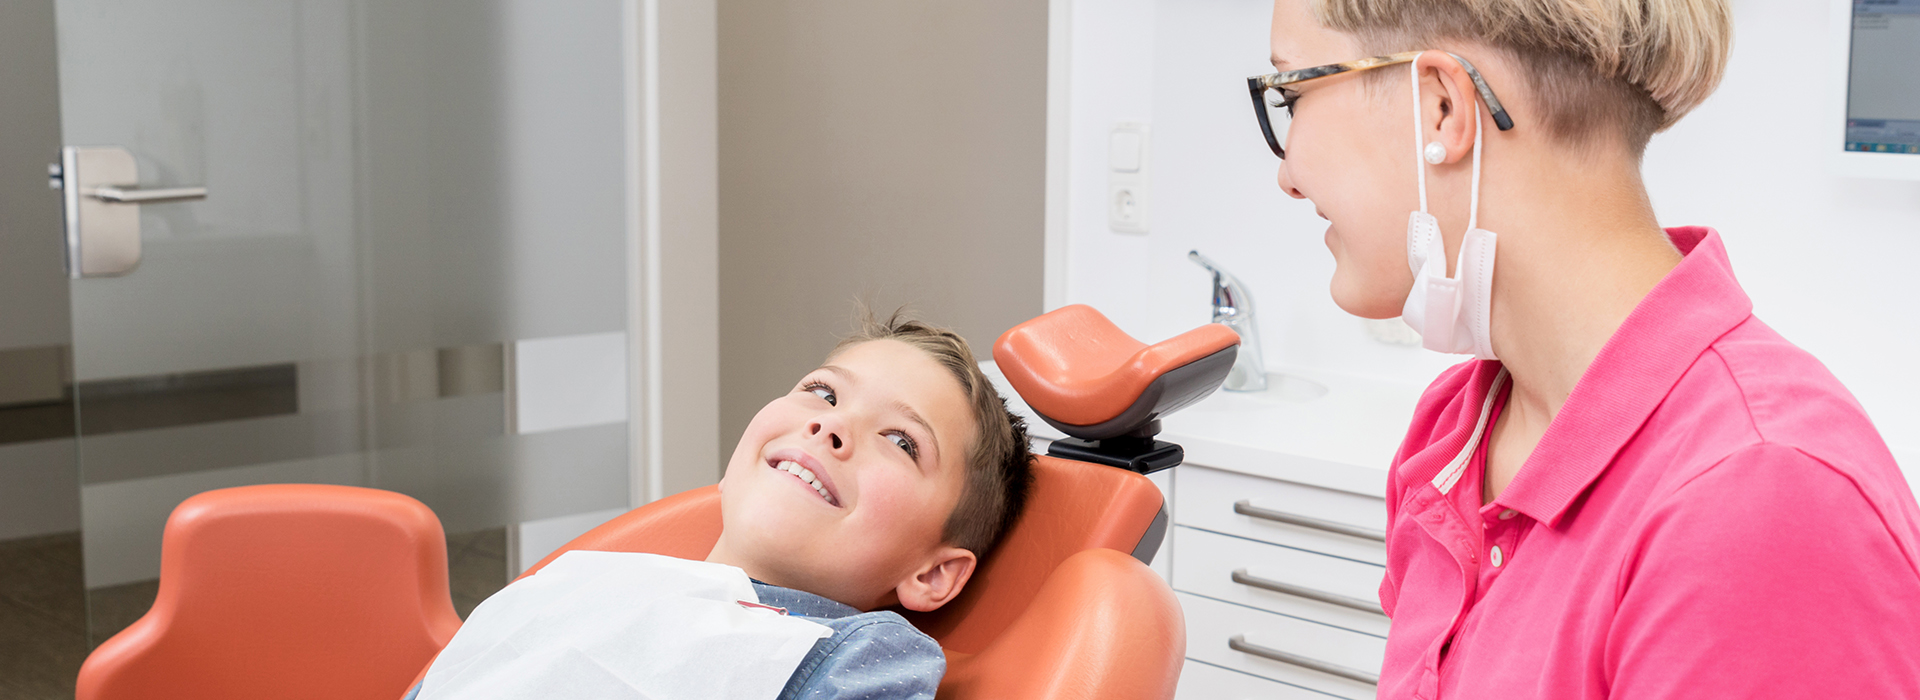 A dental office scene, featuring a dentist and a child in a chair, with the child smiling at the camera.